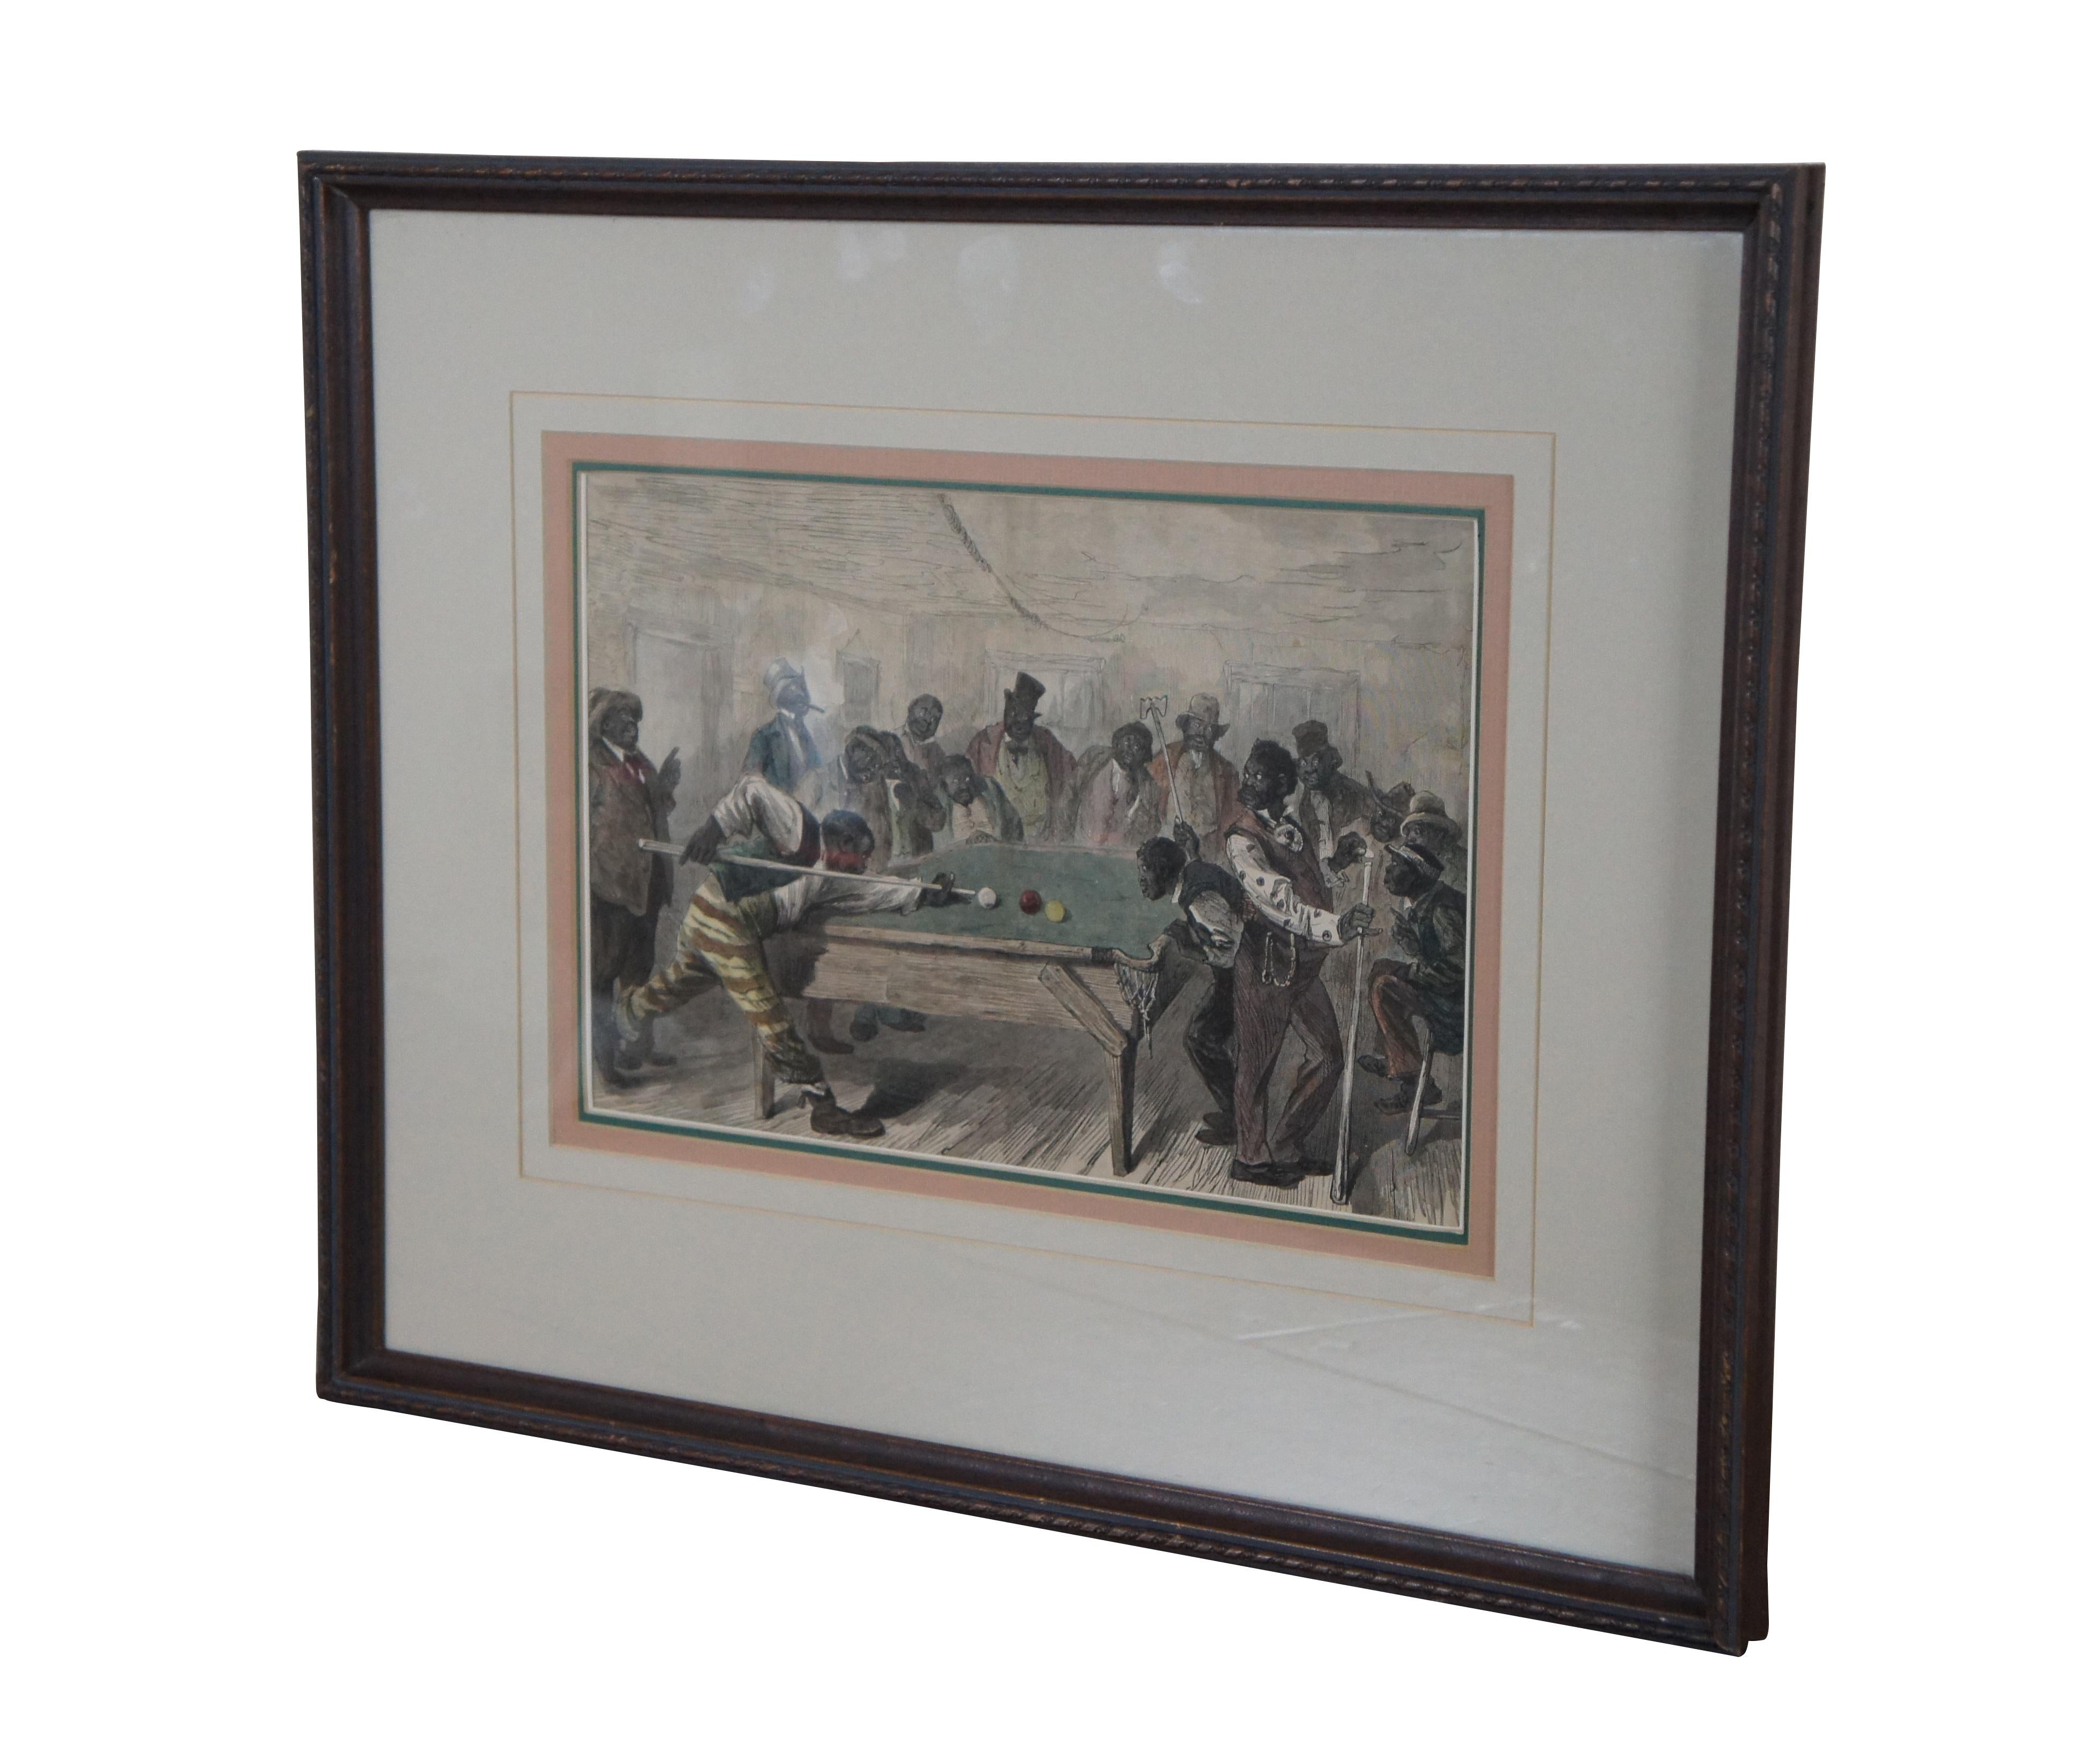 Antique late 19th century hand colored engraving titled “The Blackville Billiard Club” after Solomon Eytinge, showing a bar full of African American men playing pool / billiards. Cut from the March 31, 1883 edition Harper’s Weekly